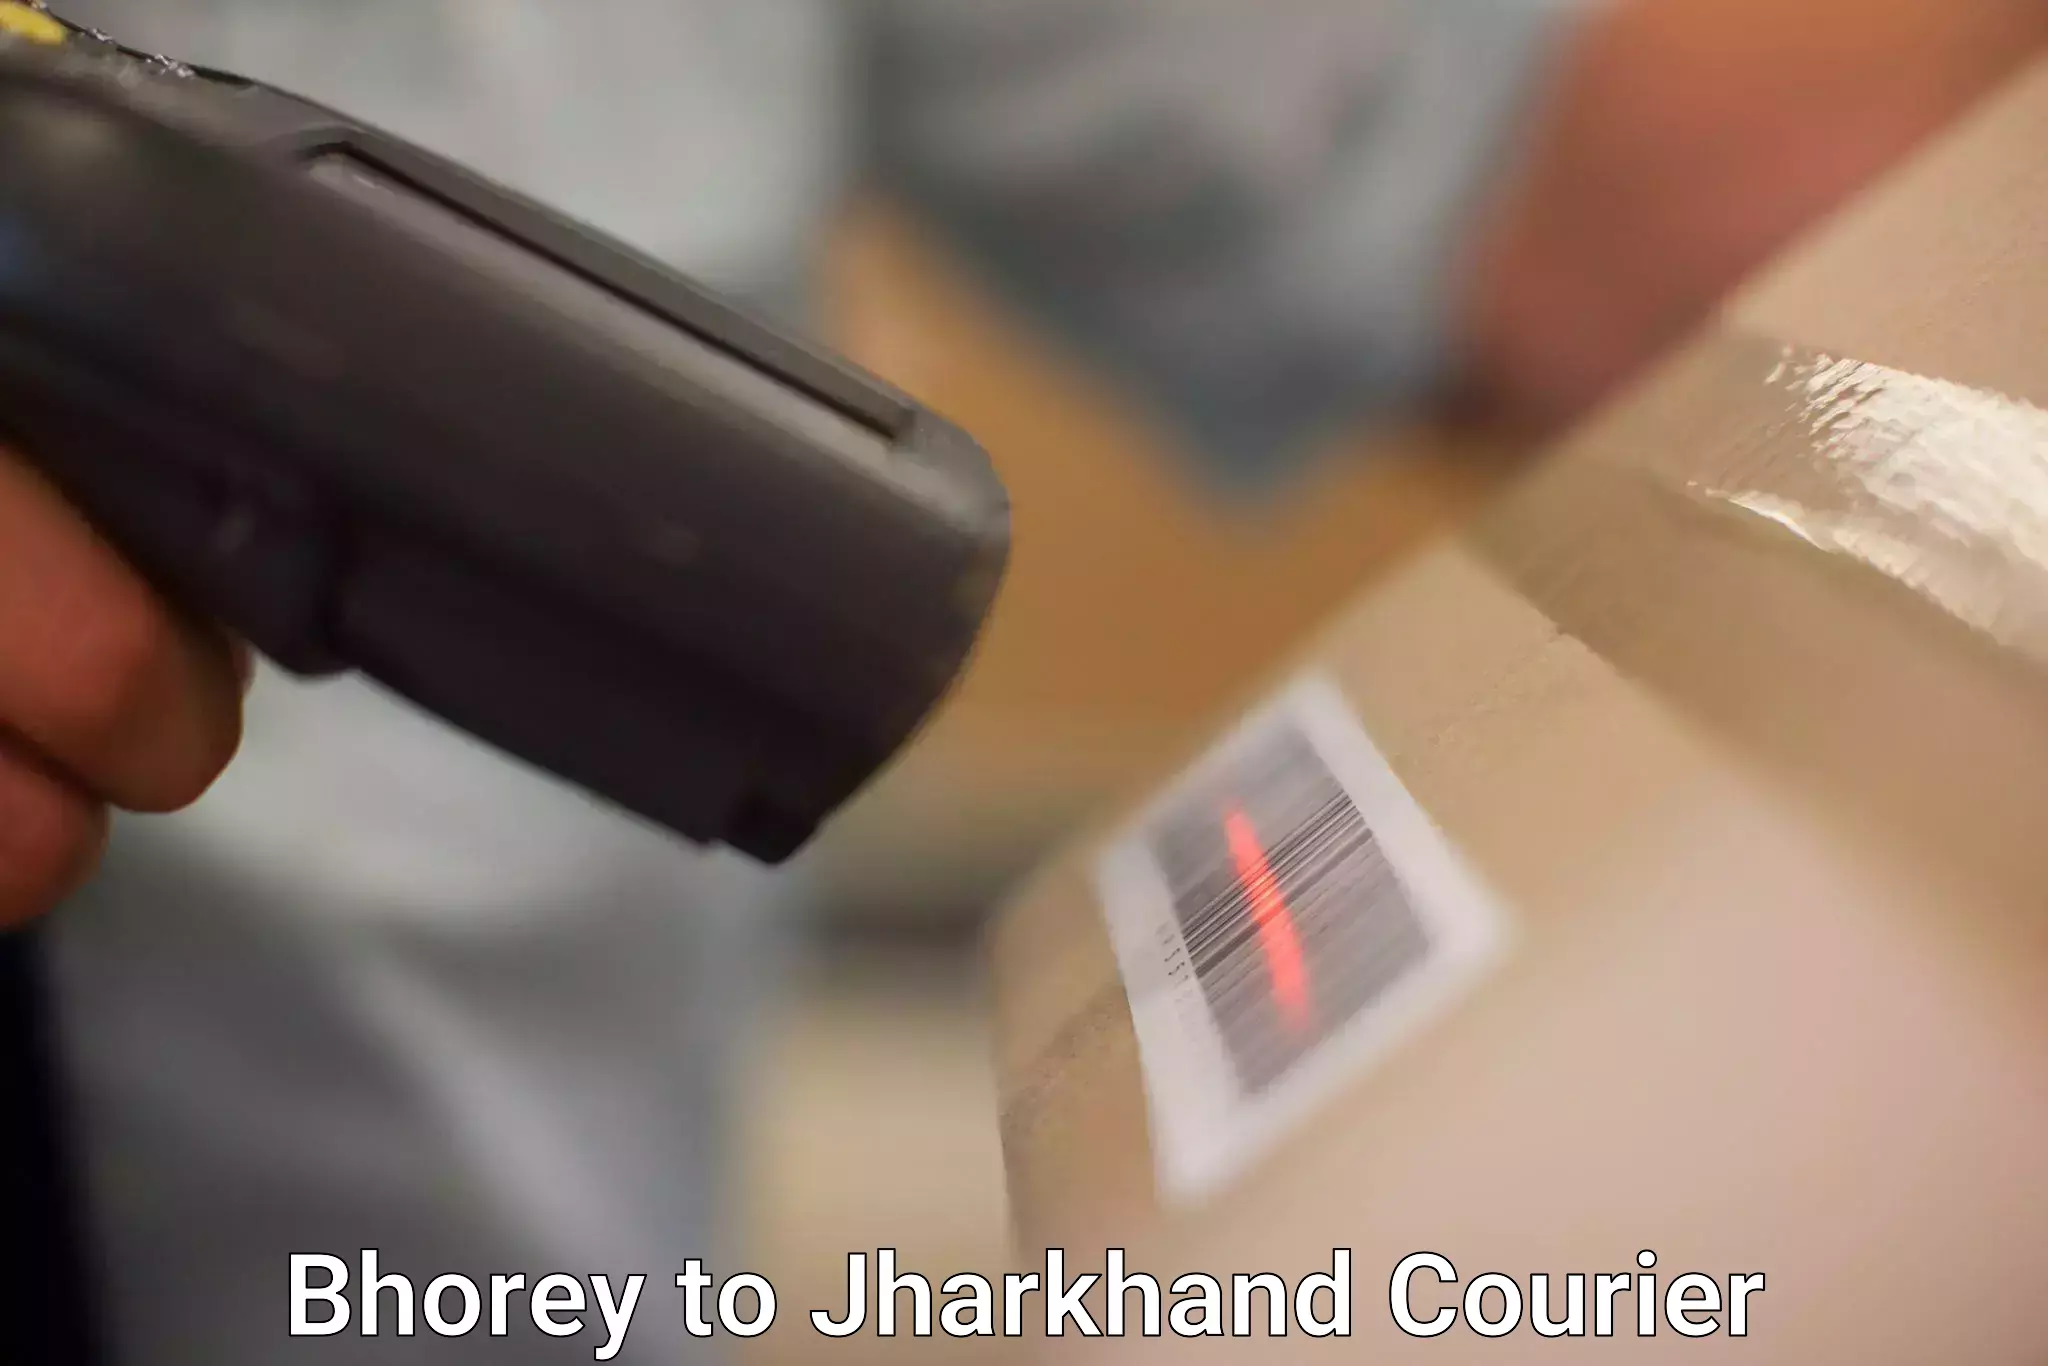 Same-day delivery options Bhorey to Jamshedpur